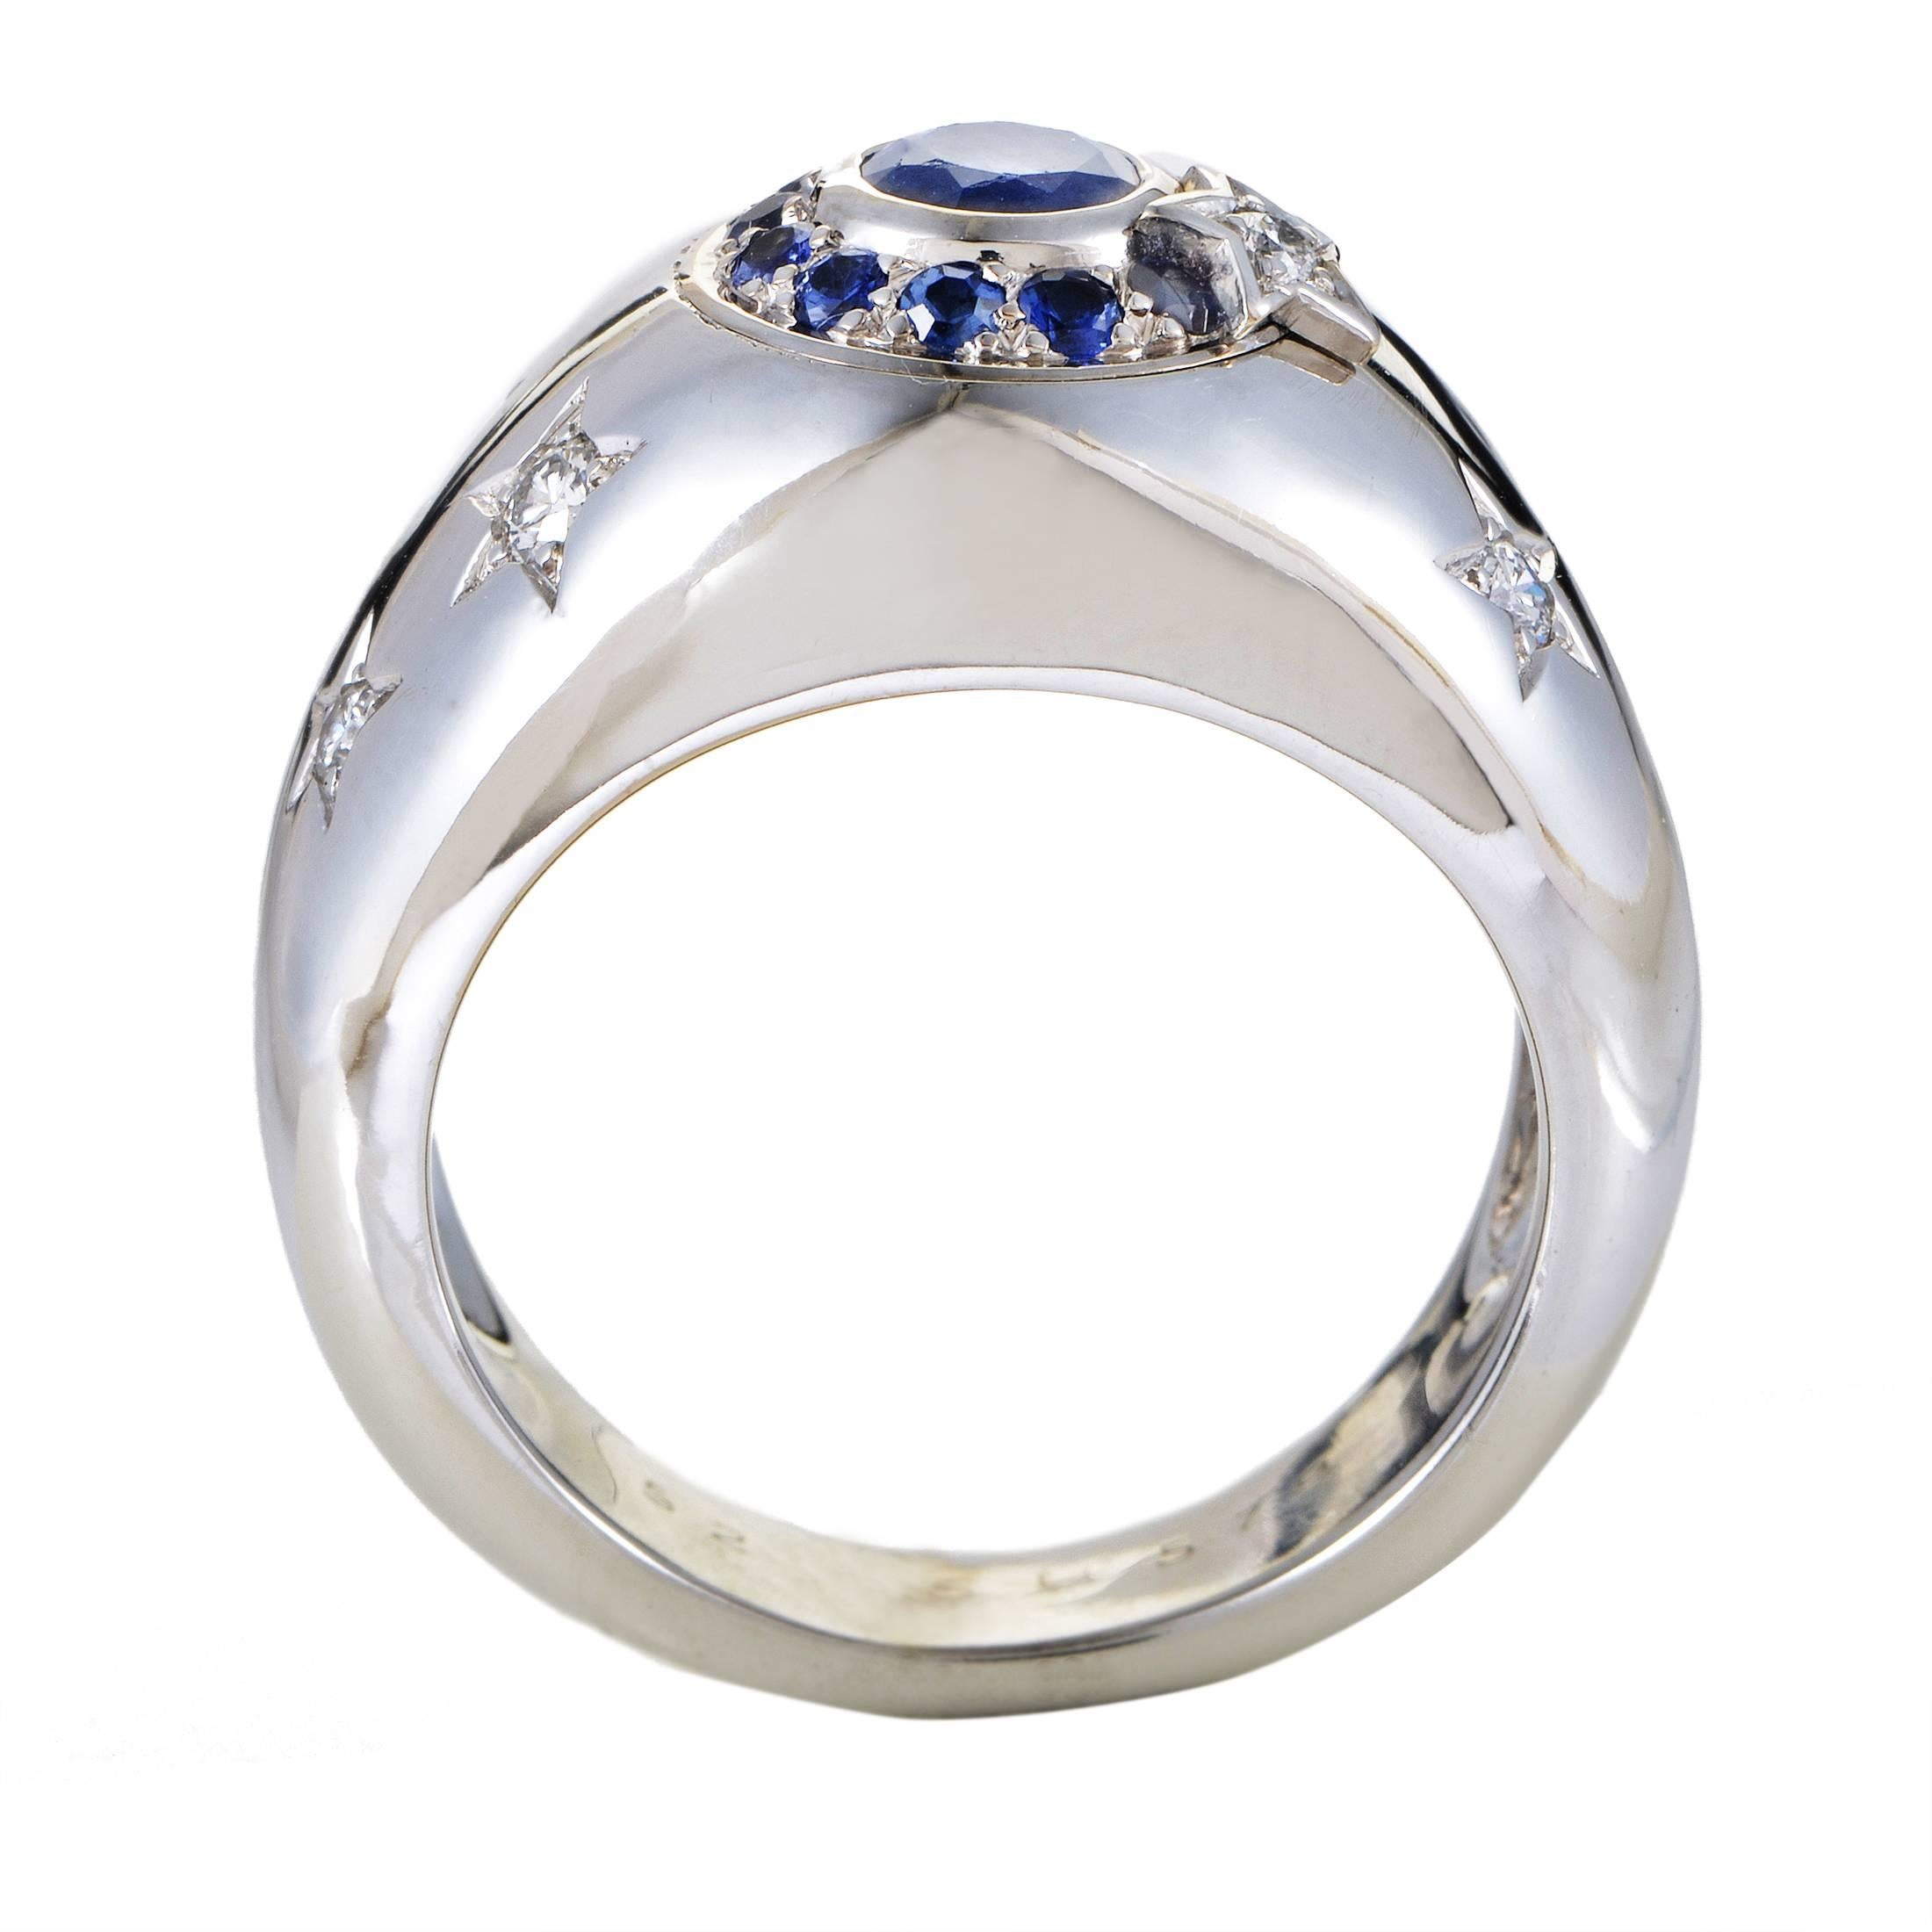 With the magnificently shaped central sapphire and numerous smaller ones around it lending their compelling color to the harmoniously bright design, this outstanding ring from Chanel is made of 18K white gold adorned with glittering diamonds and